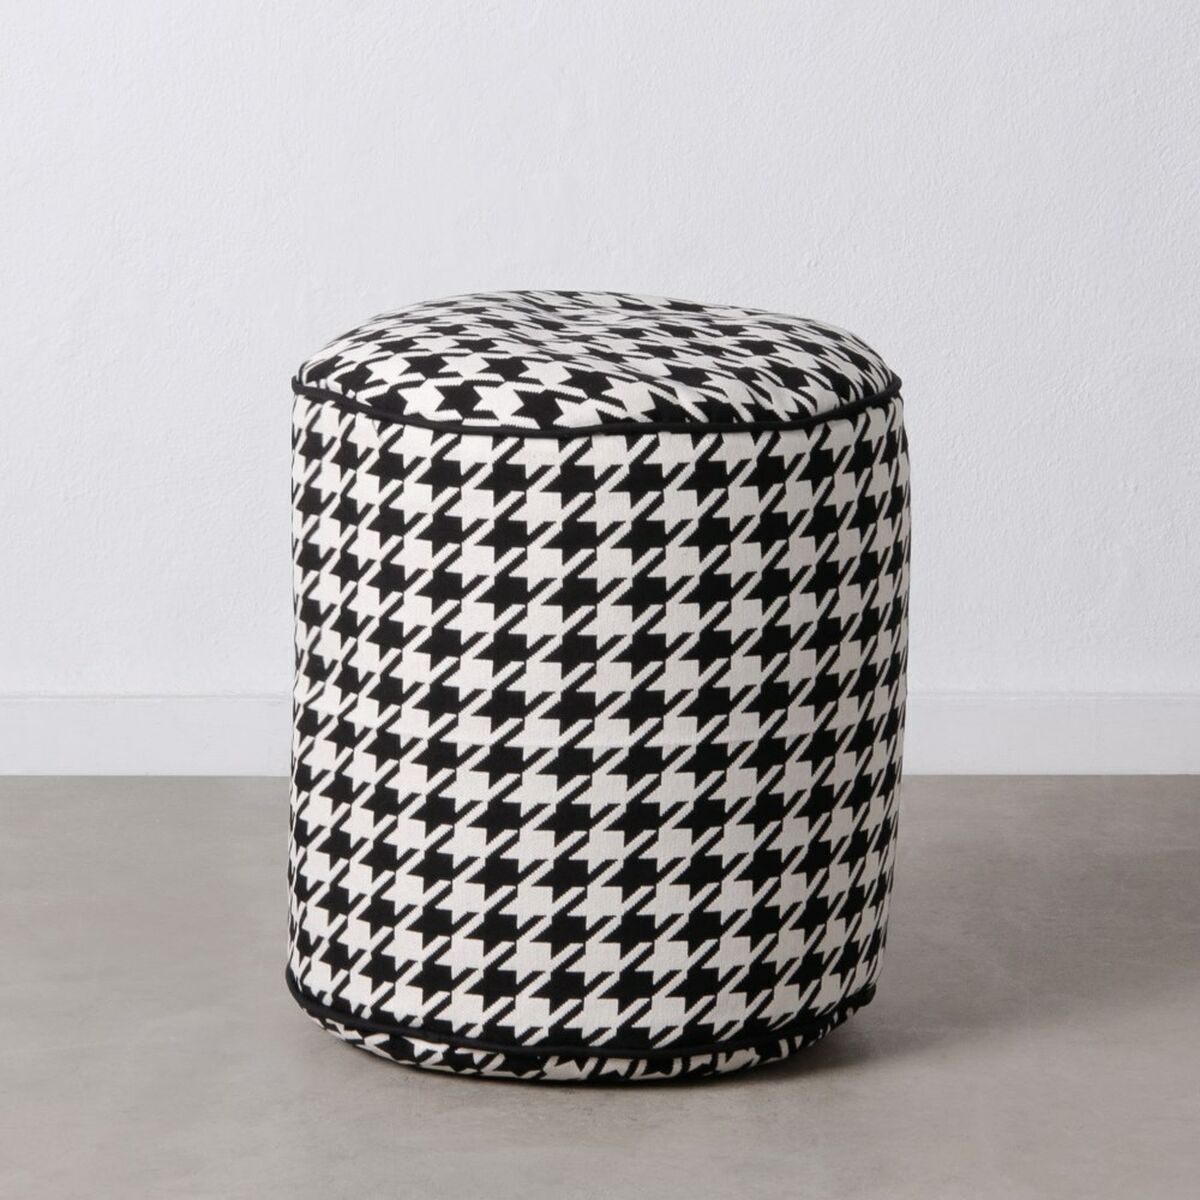 Pouffe Polyester 45 x 45 x 45 cm 100% cotton Houndstooth